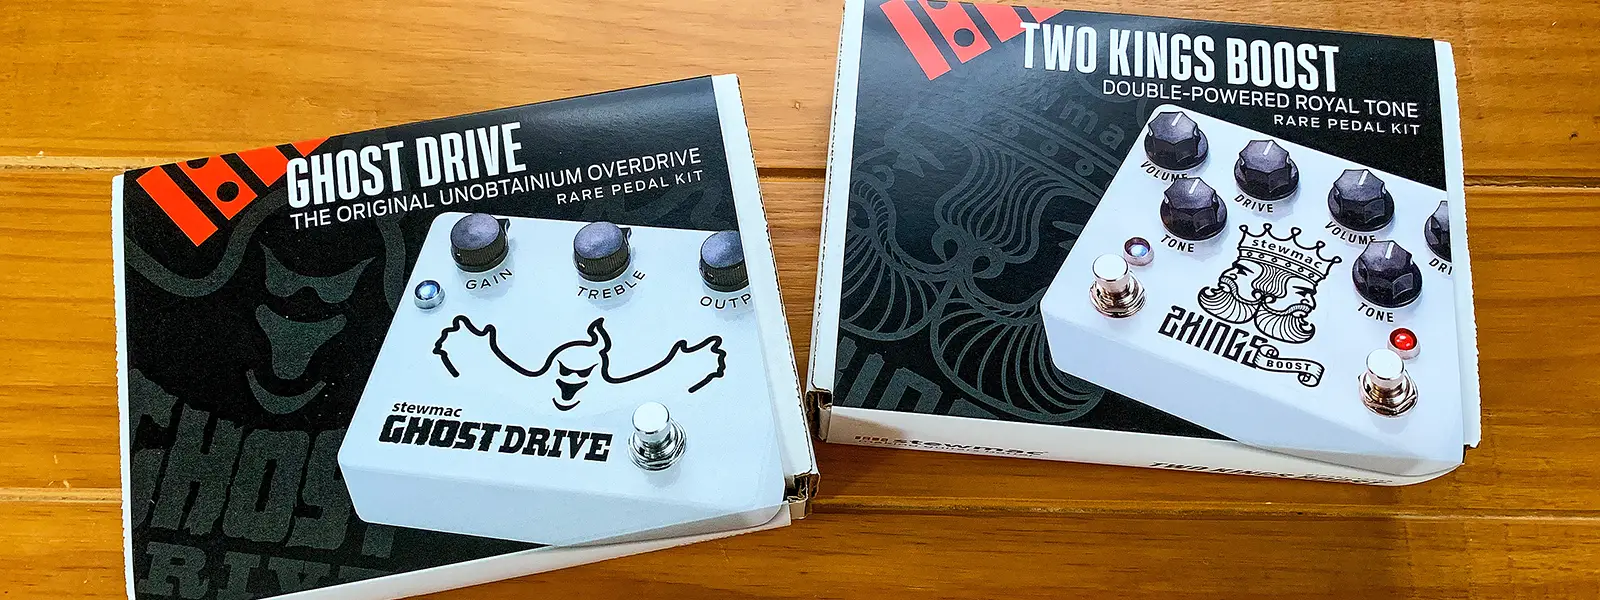 Building StewMac Ghost Drive and 2 Kings Boost Guitar Pedal Kits by Sean Rose